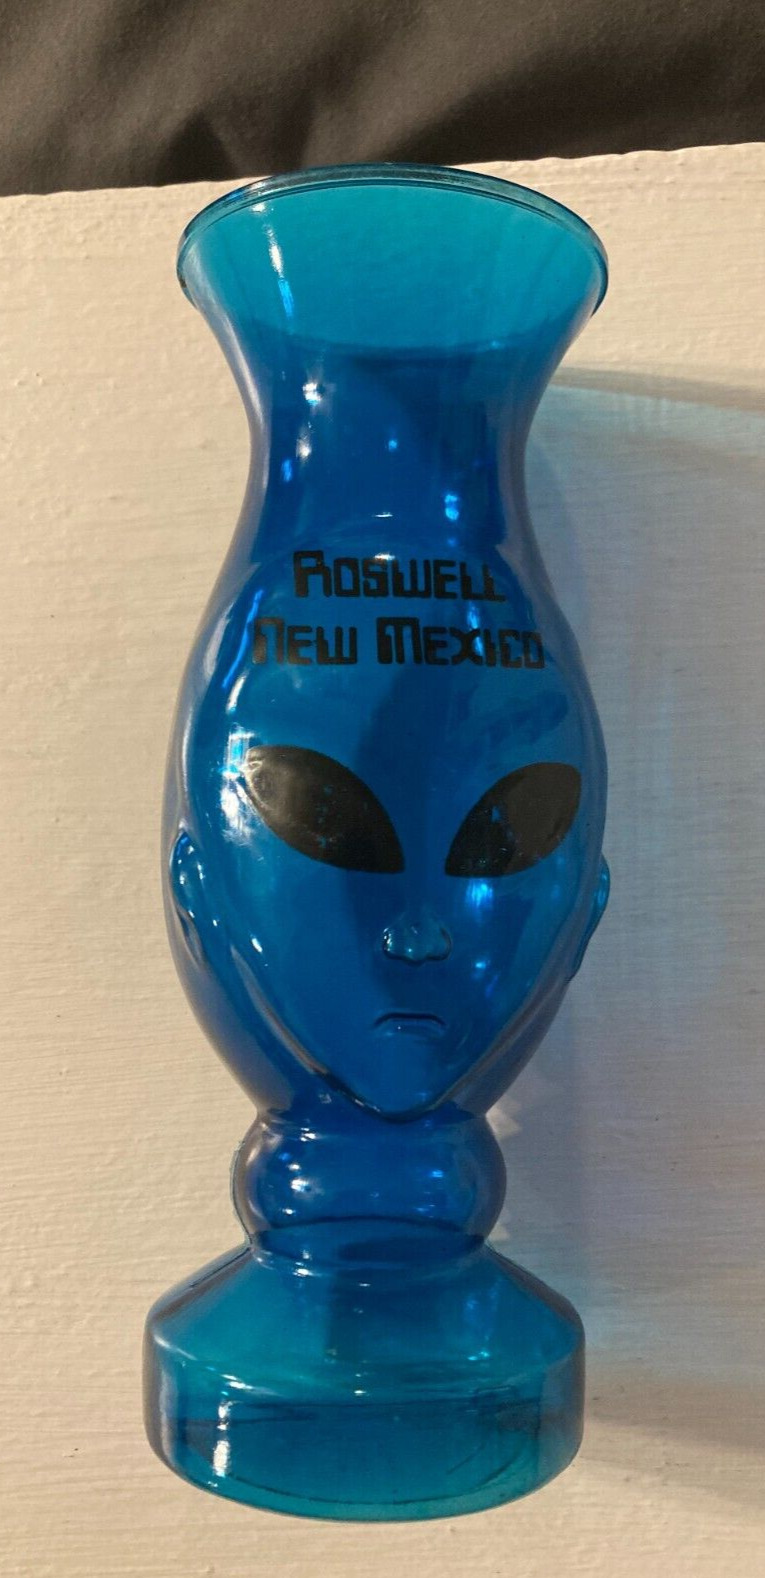 VINTAGE Roswell New Mexico ALIEN BEVERAGE CUP BLUE 1999